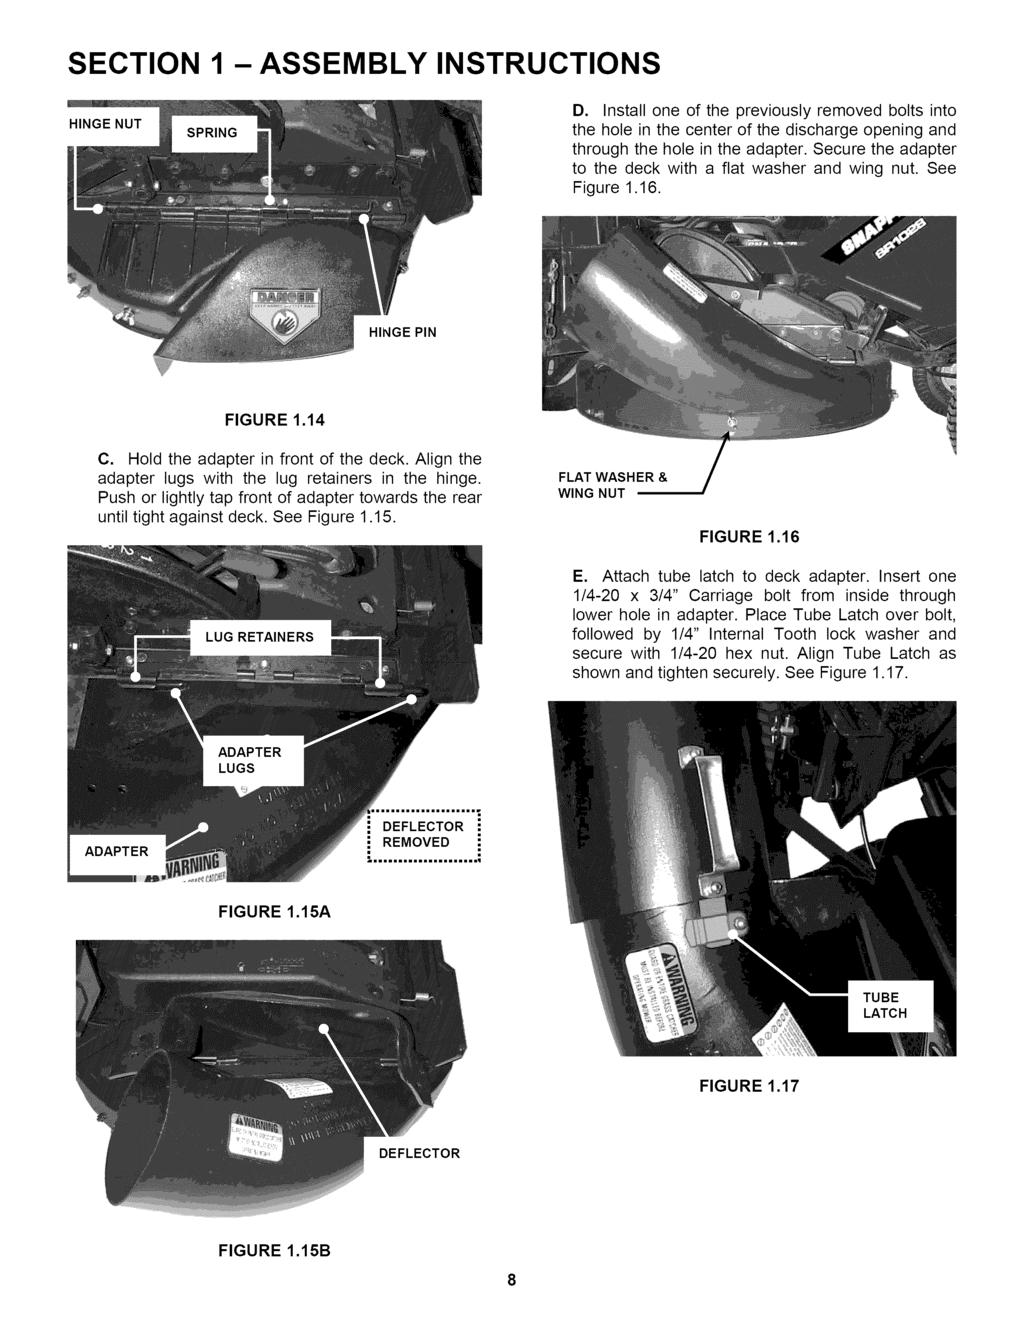 SECTION 1 - ASSEMBLY INSTRUCTIONS HINGE NUT D. Install one of the previously removed bolts into the hole in the center of the discharge opening and through the hole in the adapter.